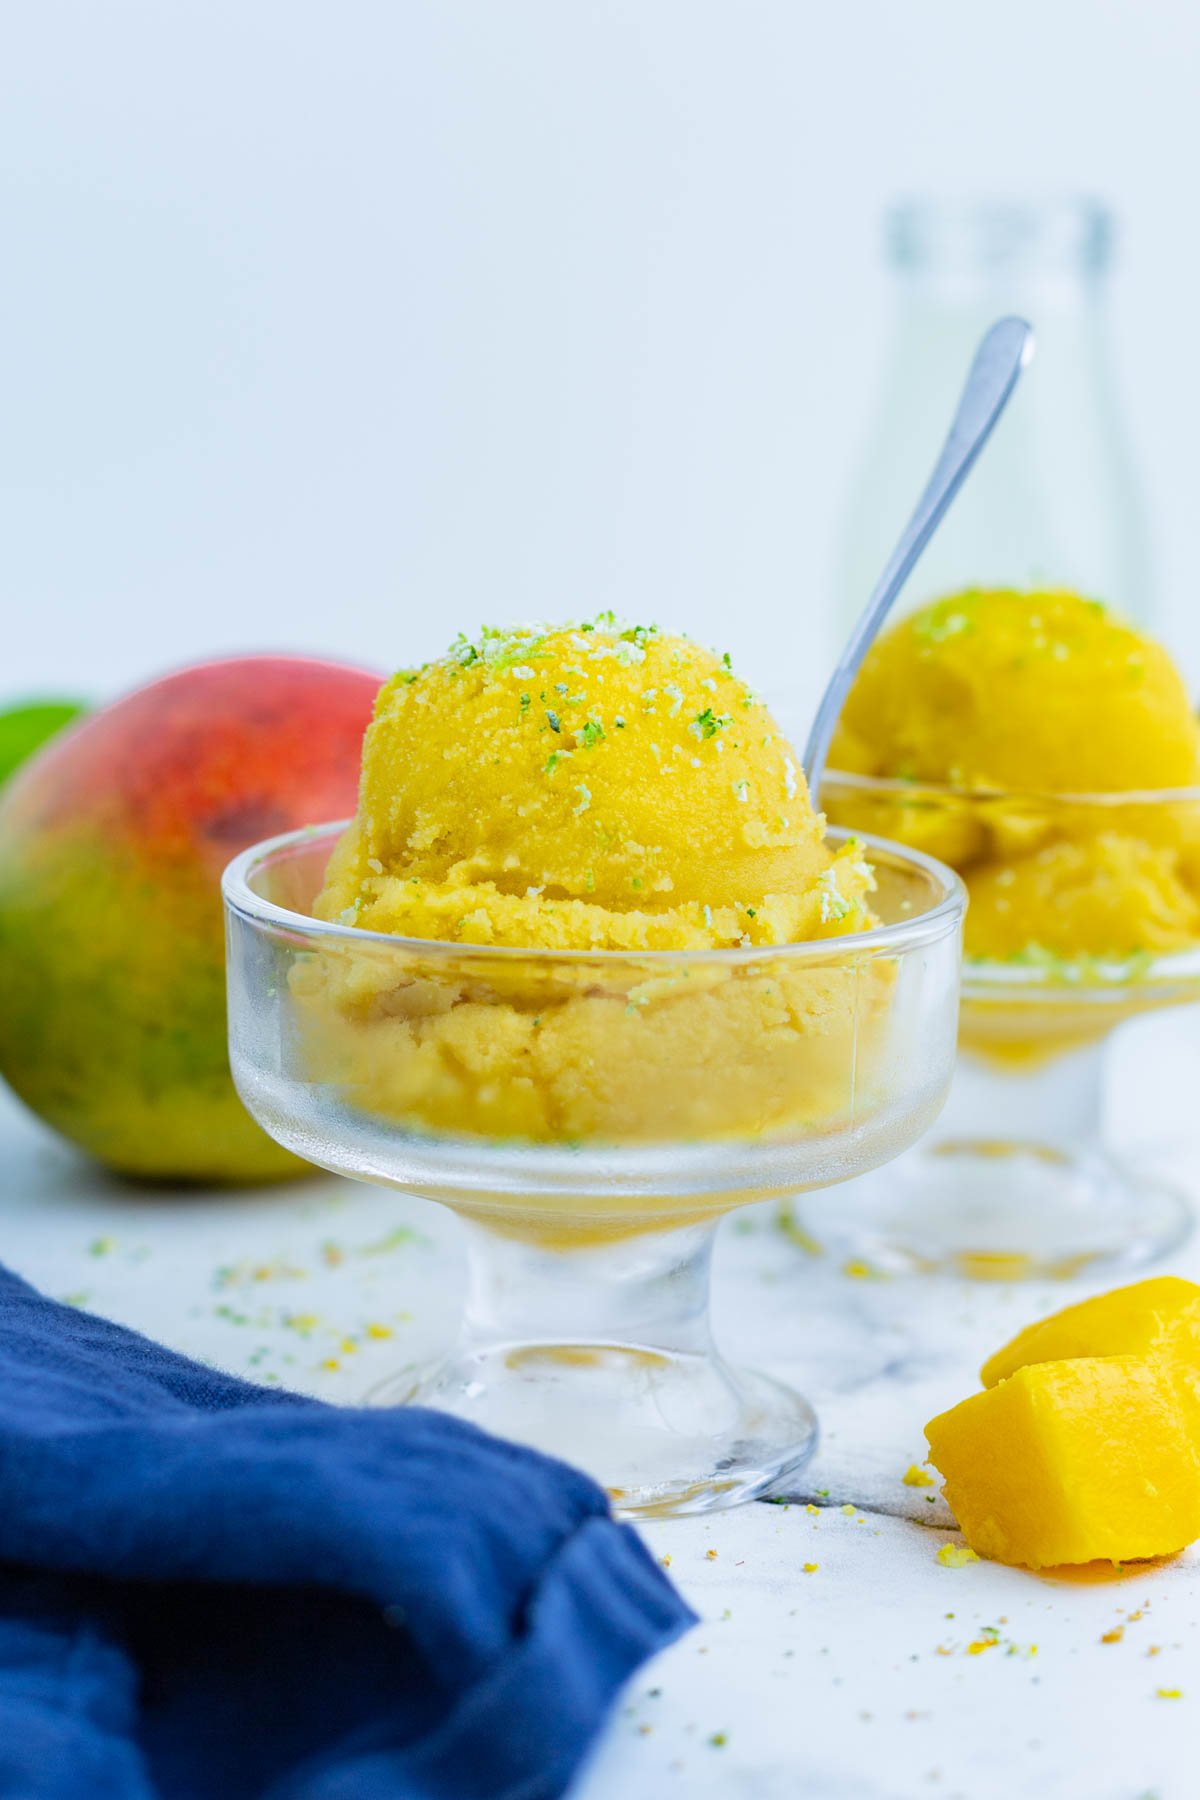 Two bowls full of mango sorbet are served up.